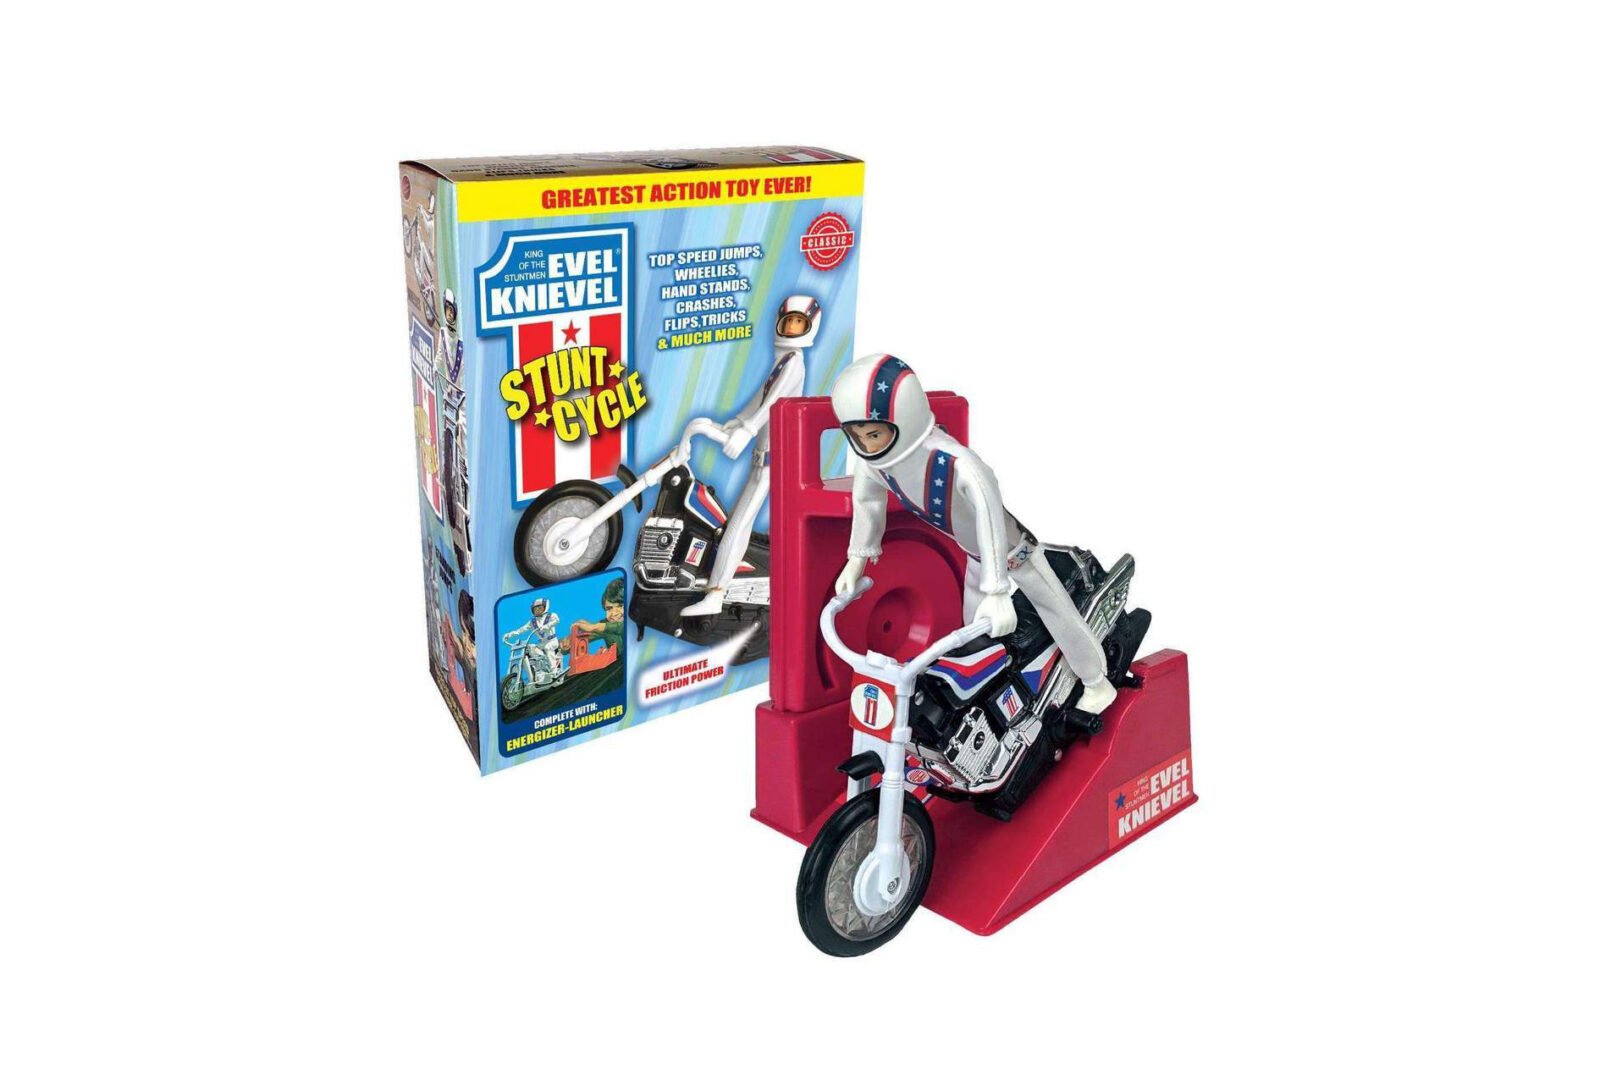 Evel Knievel Stunt Cycle Toy